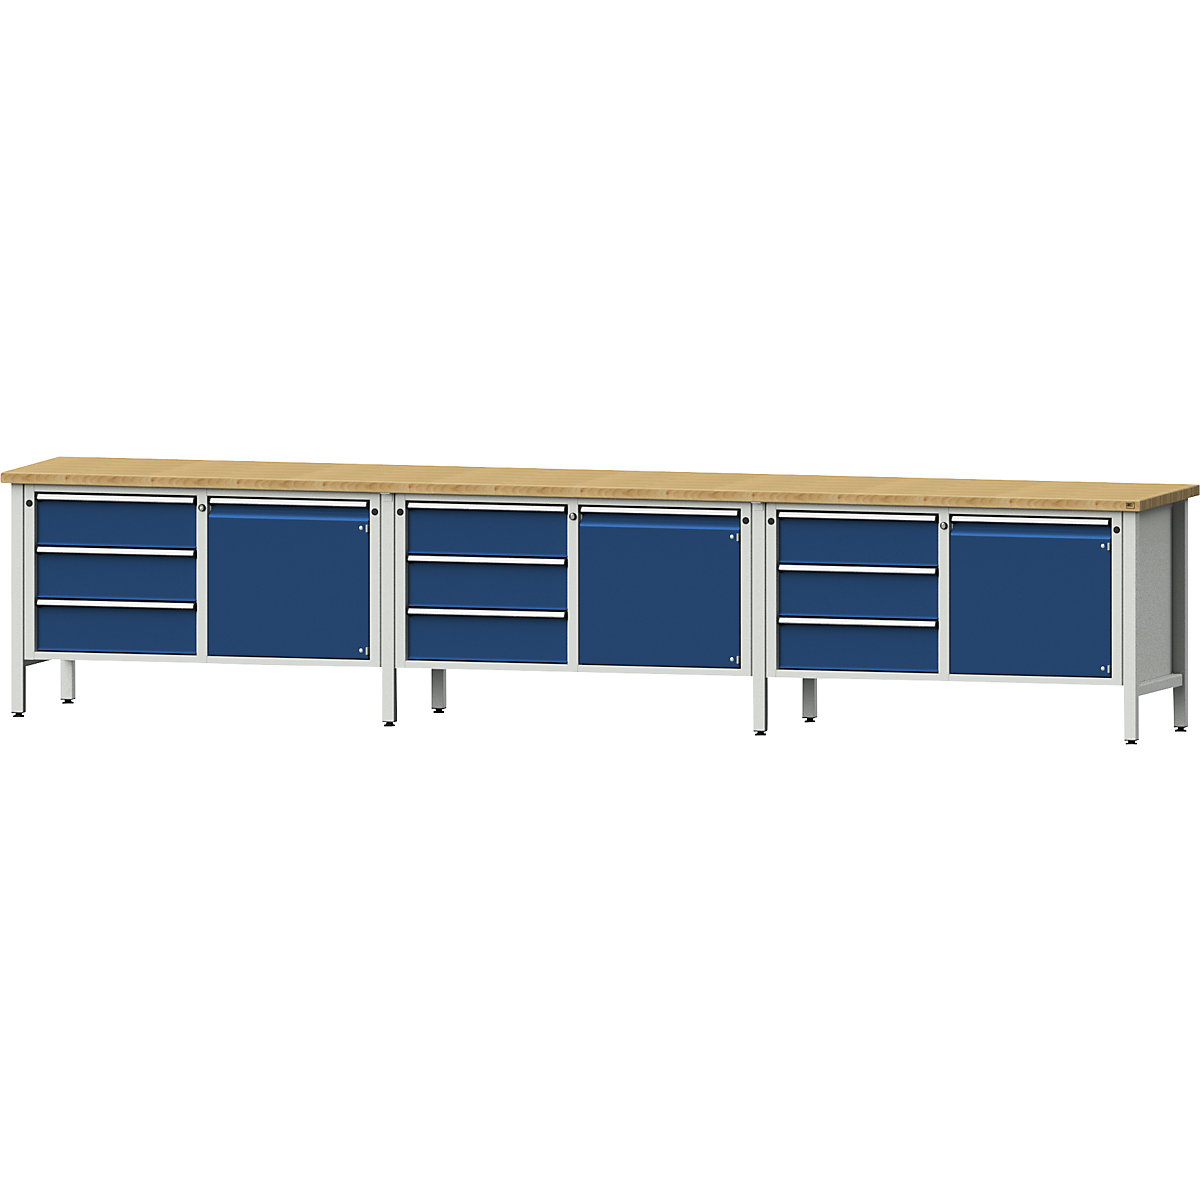 Workbench extra wide, frame construction – ANKE